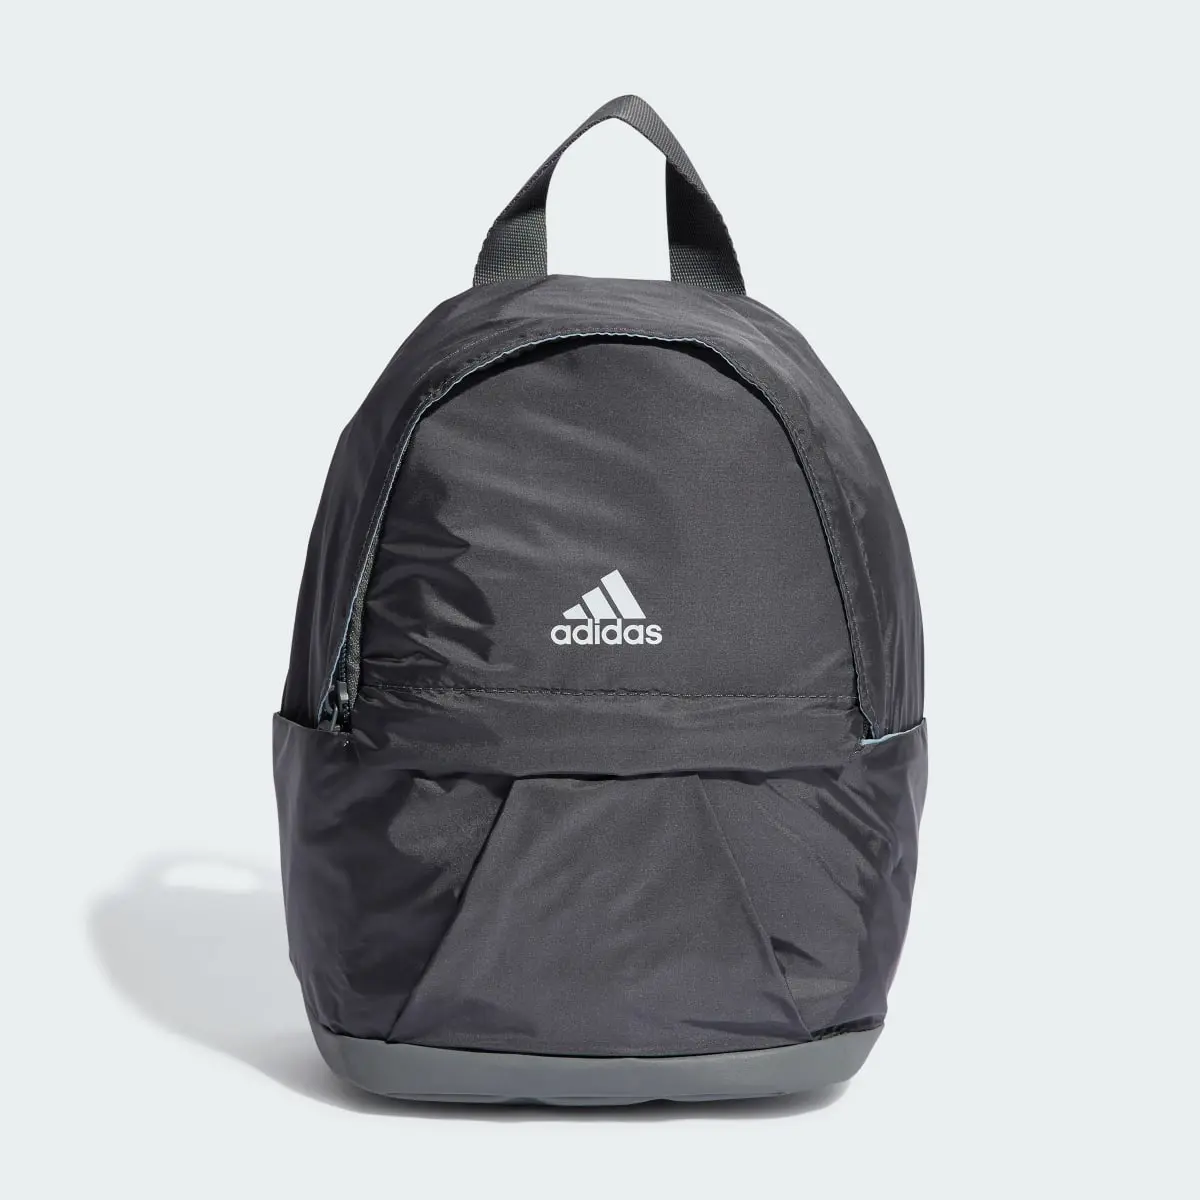 Adidas Classic Gen Z Backpack Extra Small. 2